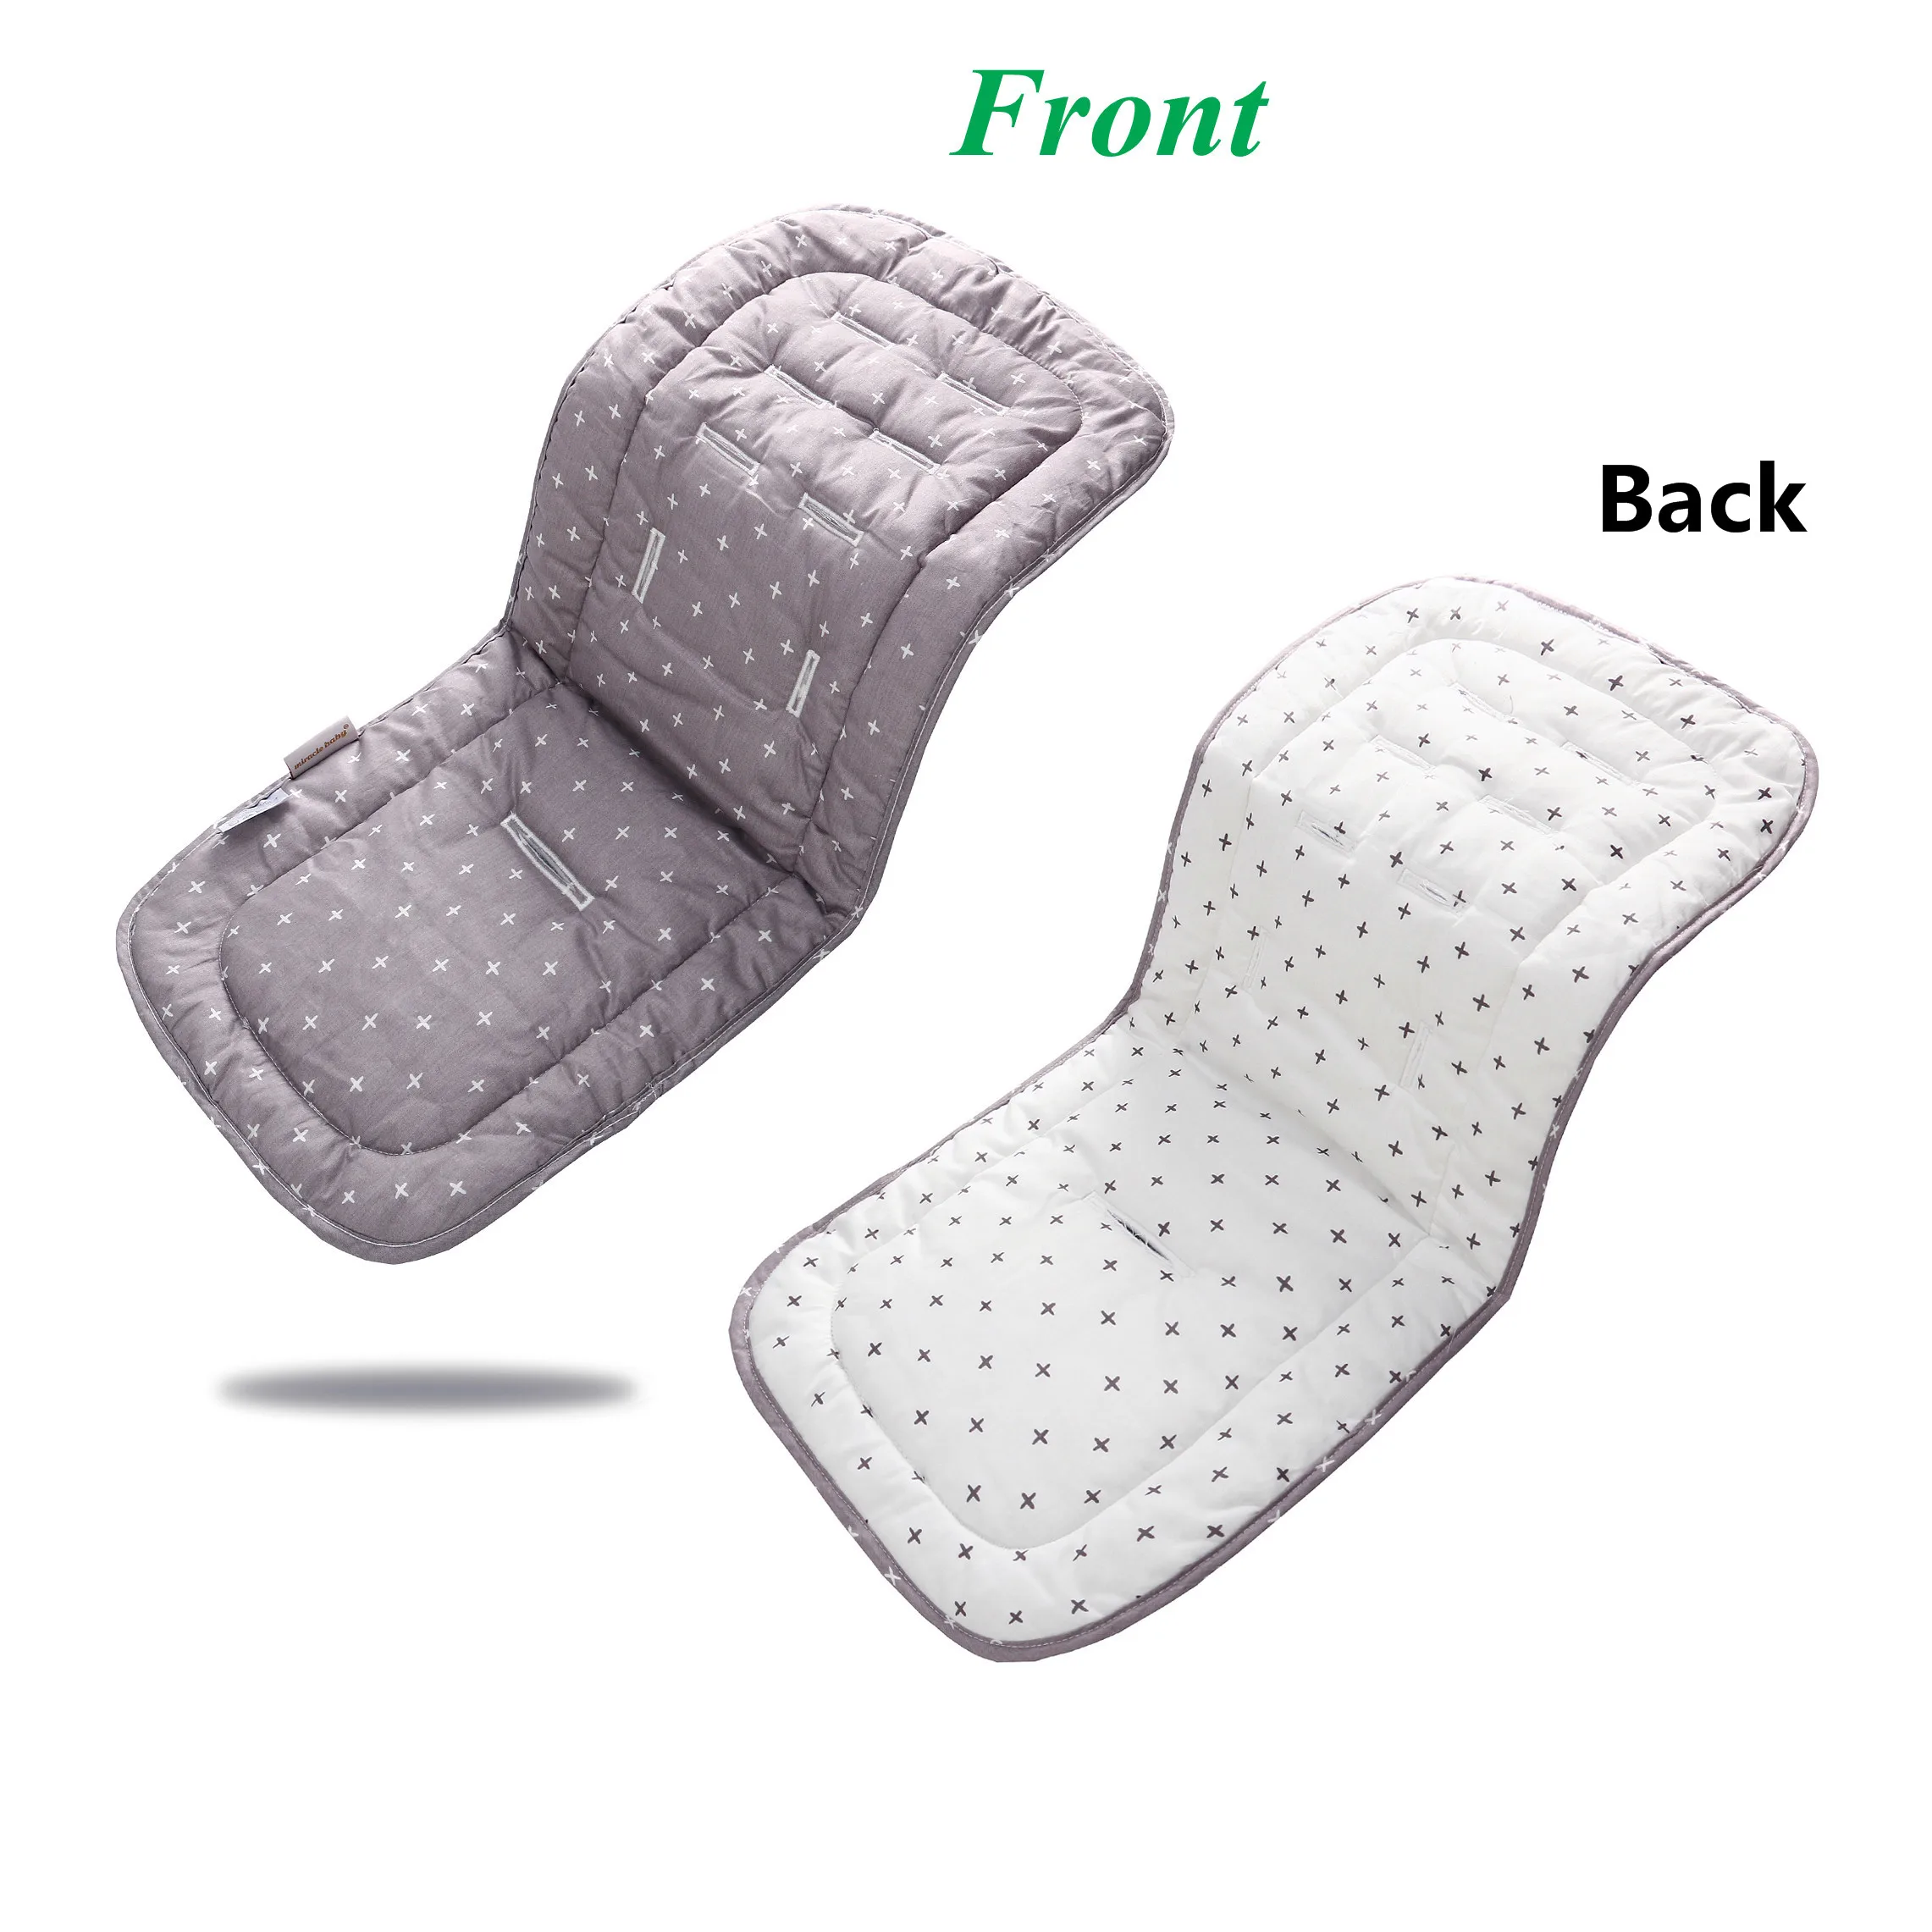 2 sides Cotton Baby Stroller cushion Seat pad Infant Prin Diaper Pad Changing Mat Seat Pad For Unisex Pram Stroller Accessories best stroller for kid and baby Baby Strollers